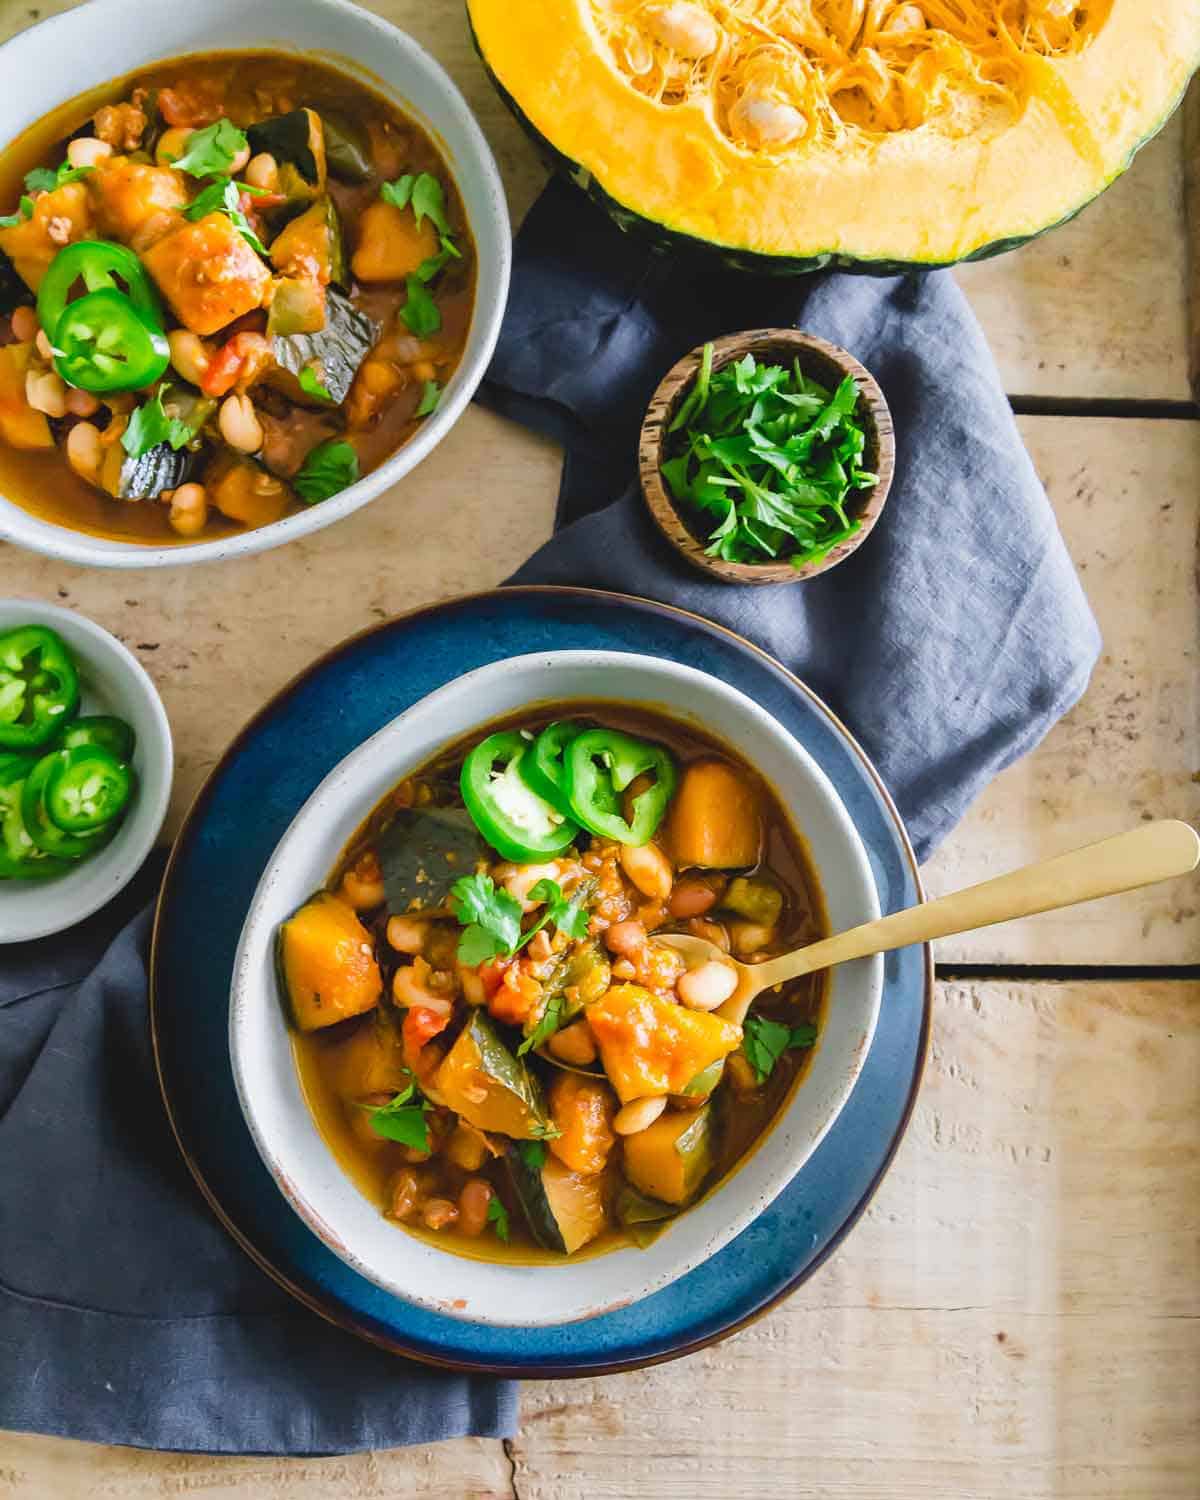 This kabocha squash chili recipe uses an easy slow cooker method so dinner is ready for you at the end of the day. 